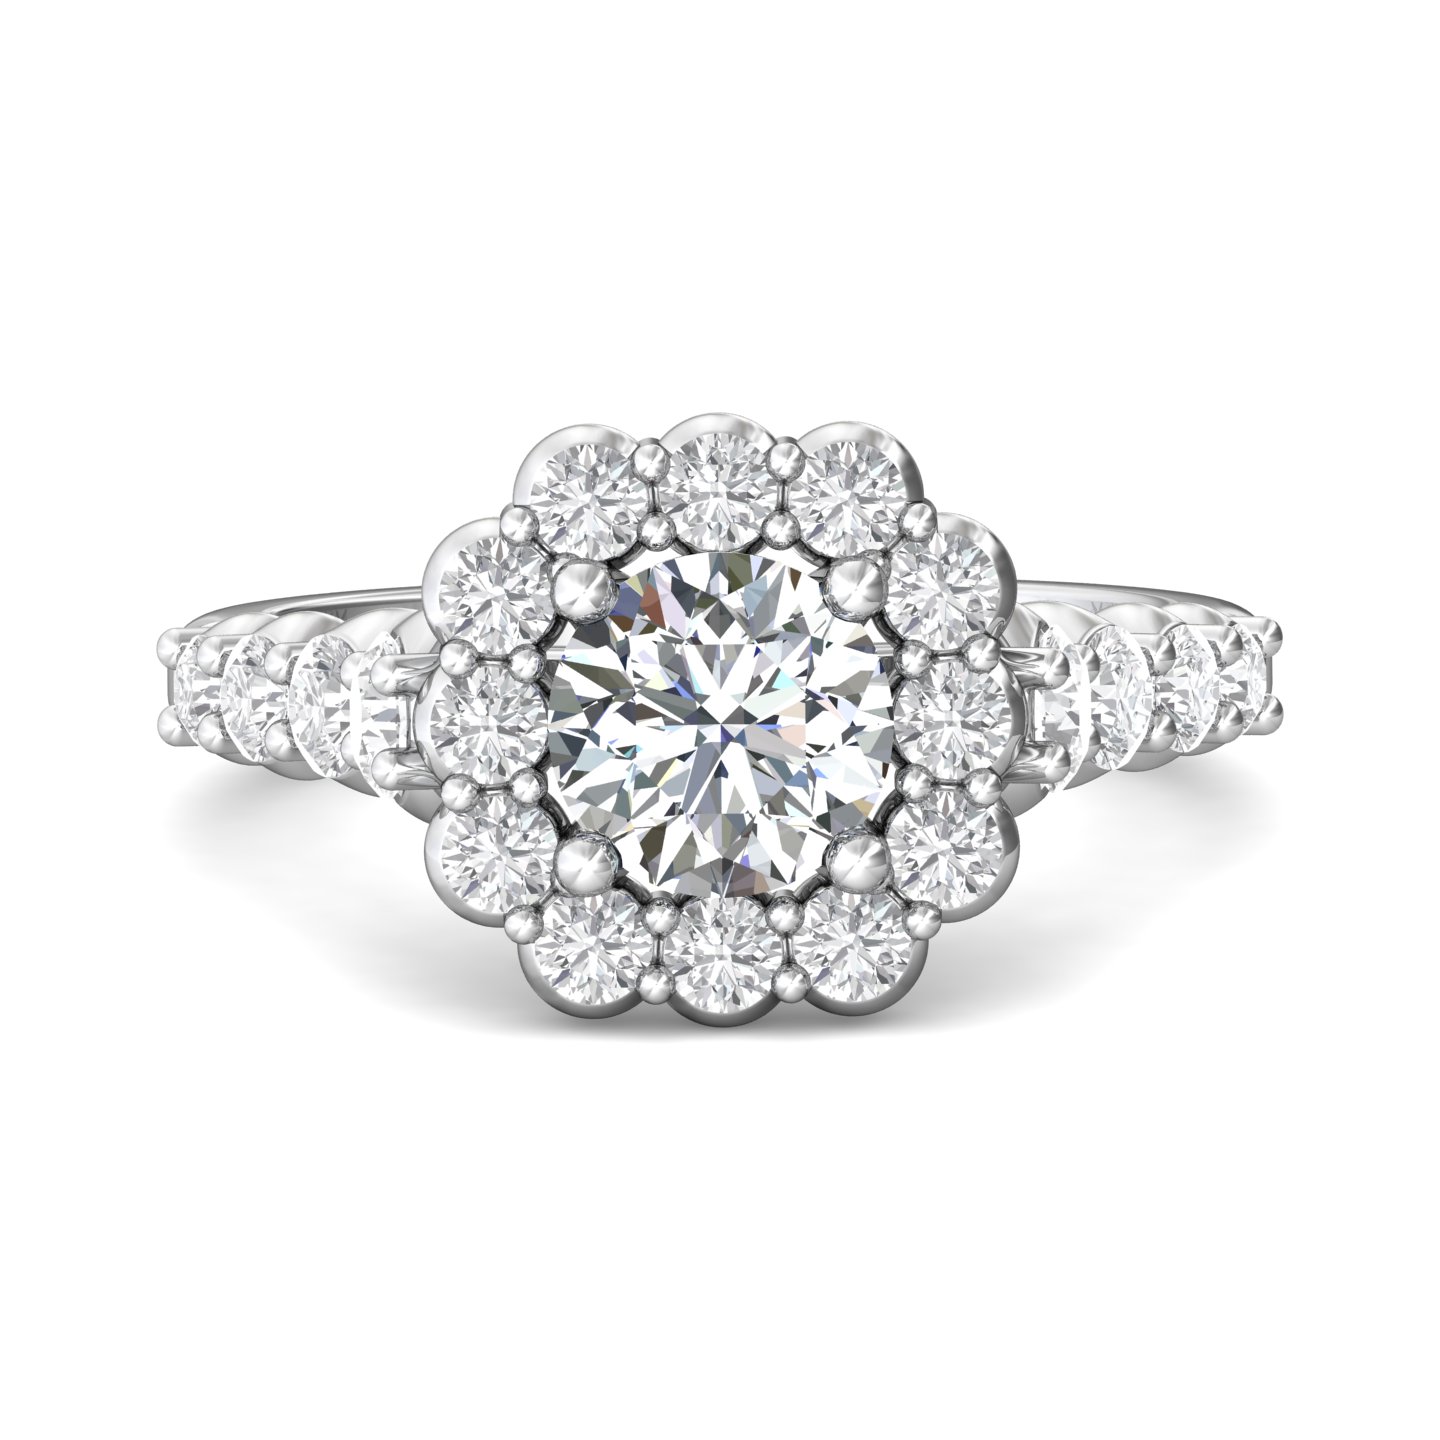 14K White Gold FlyerFit Channel/Shared Prong Engagement Ring Christopher's Fine Jewelry Pawleys Island, SC